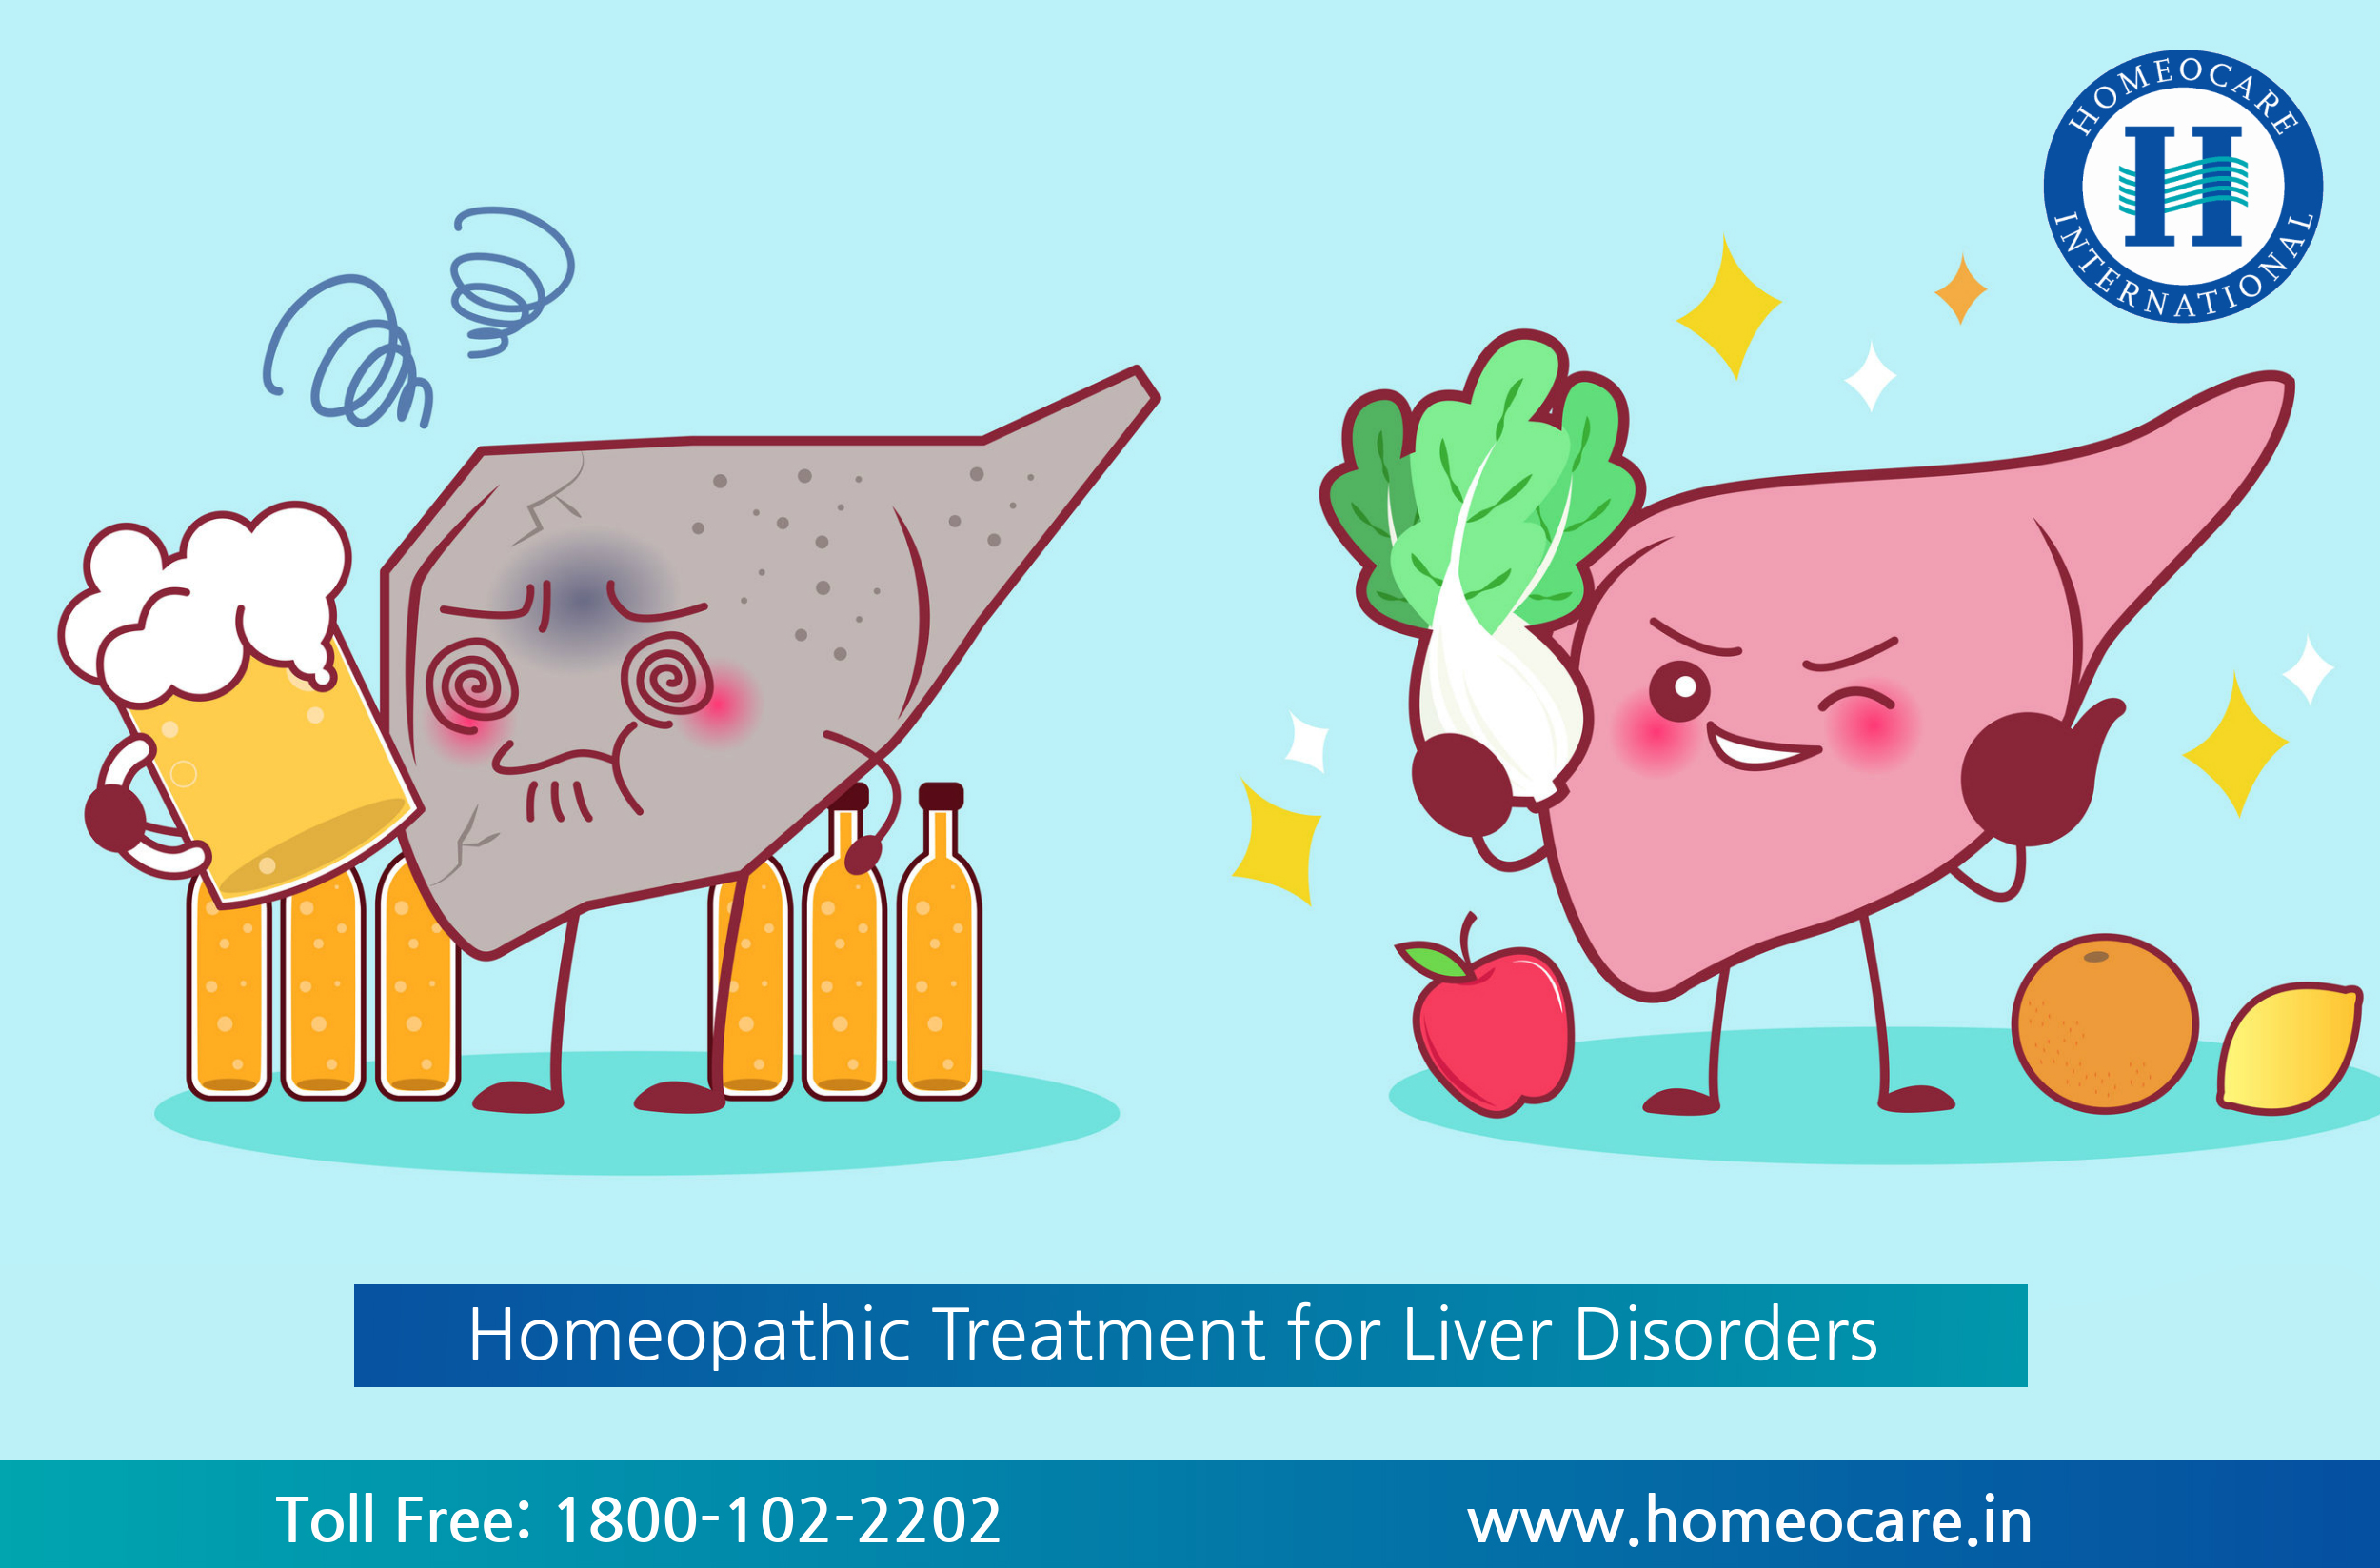 Homeopathic Treatment for Liver Disorders